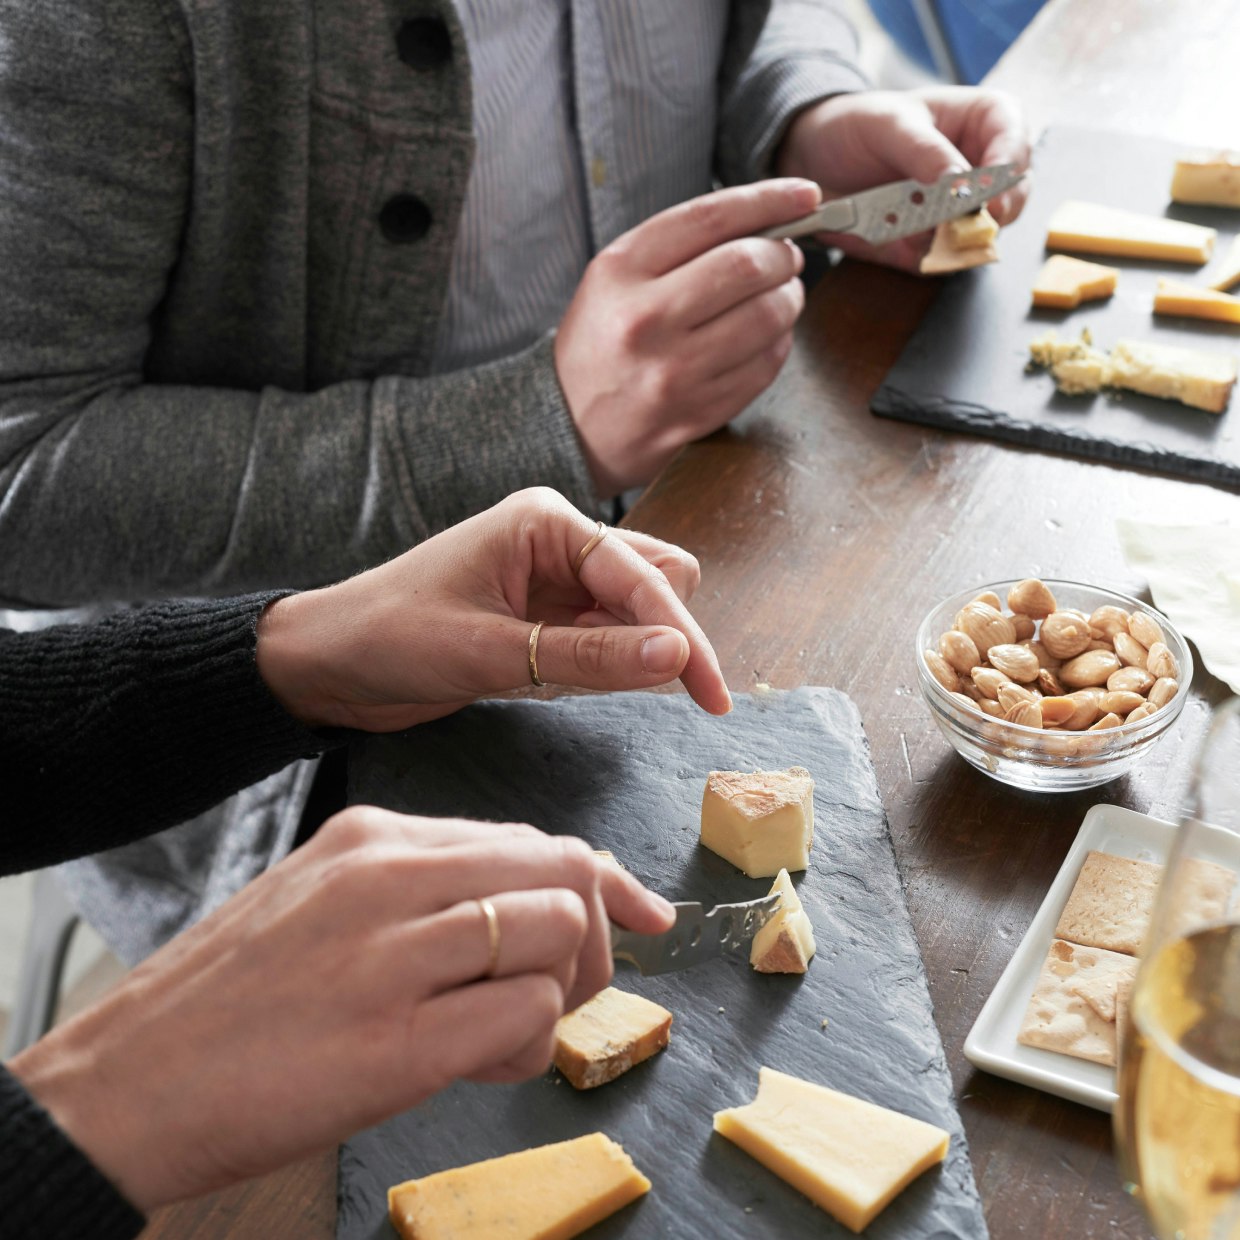 Our Cheese Classes